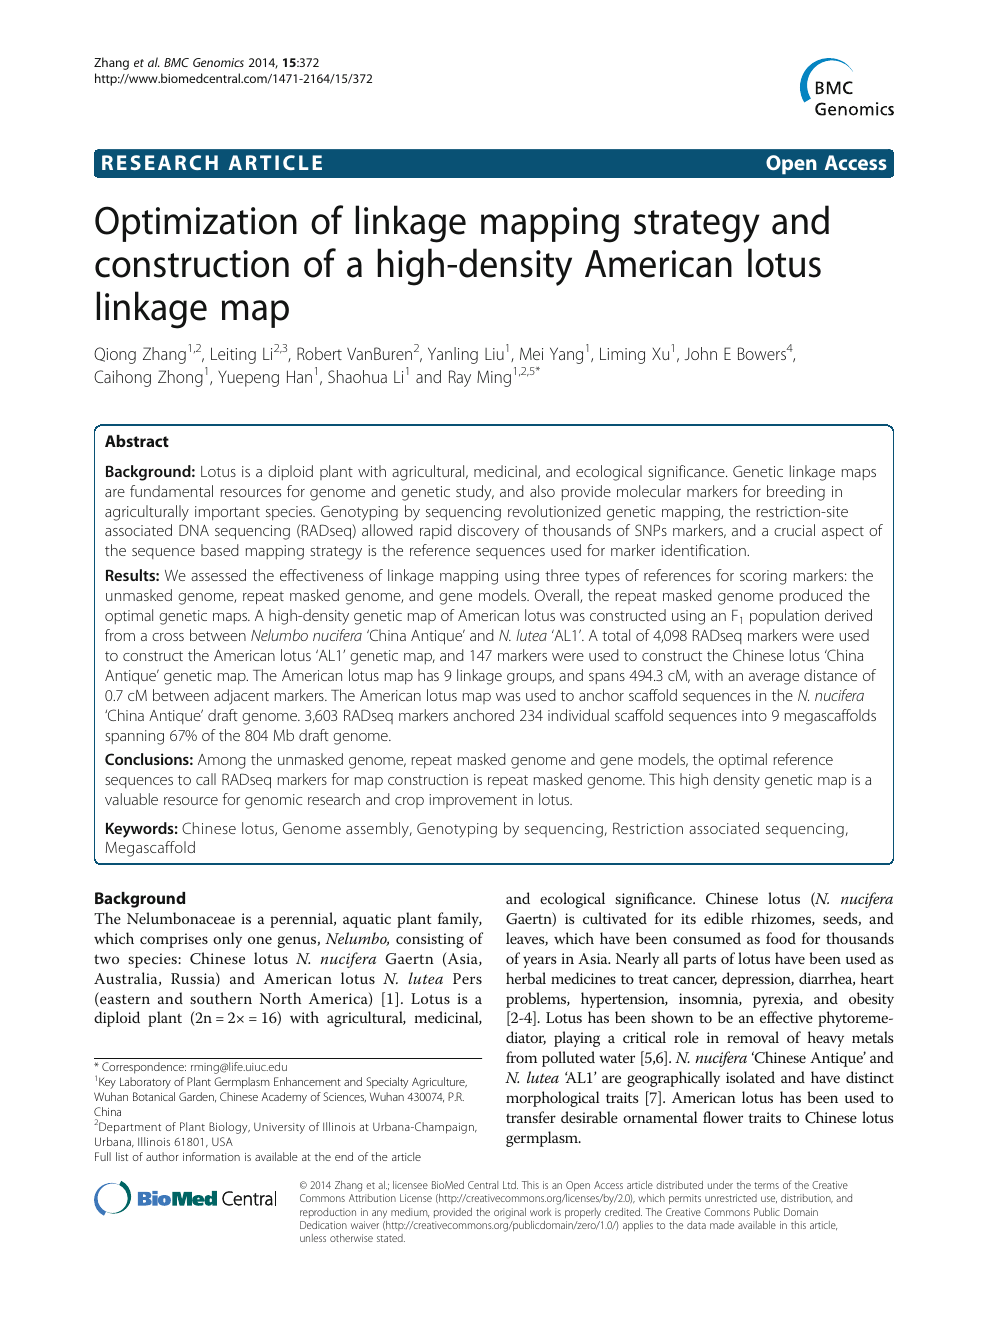 Optimization Of Linkage Mapping Strategy And Construction Of A